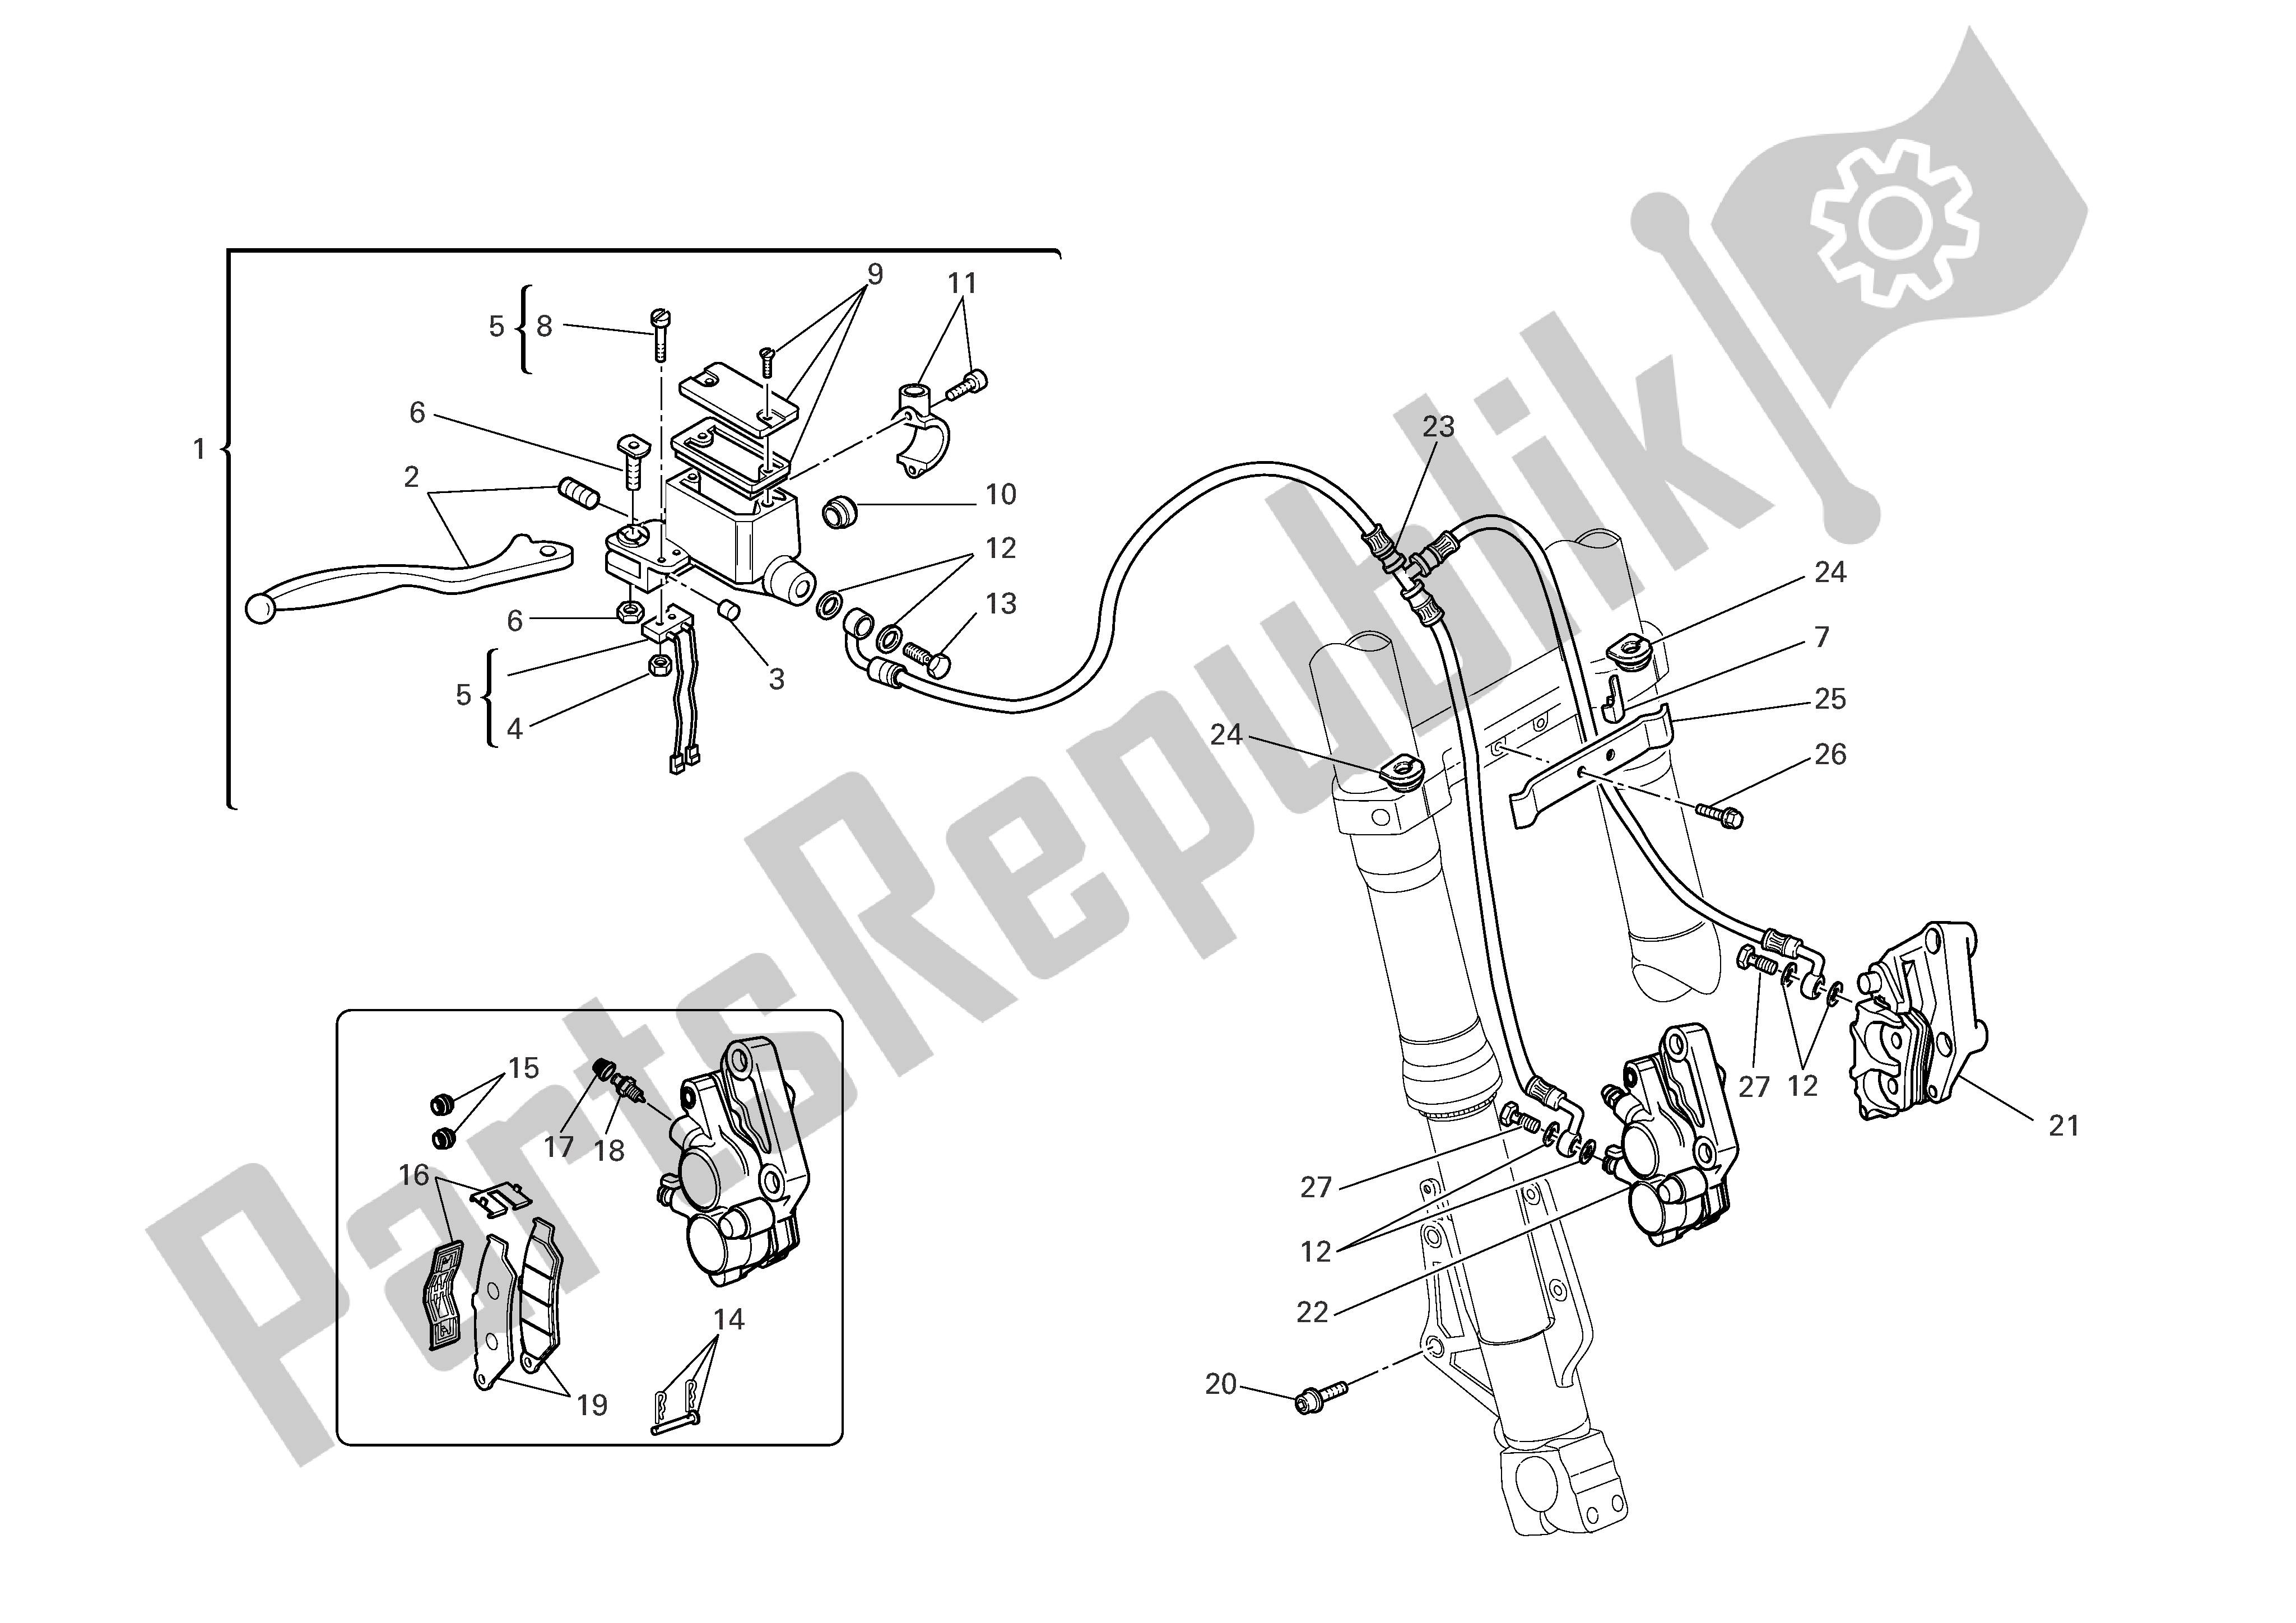 All parts for the Front Brake of the Ducati Multistrada 620 2006